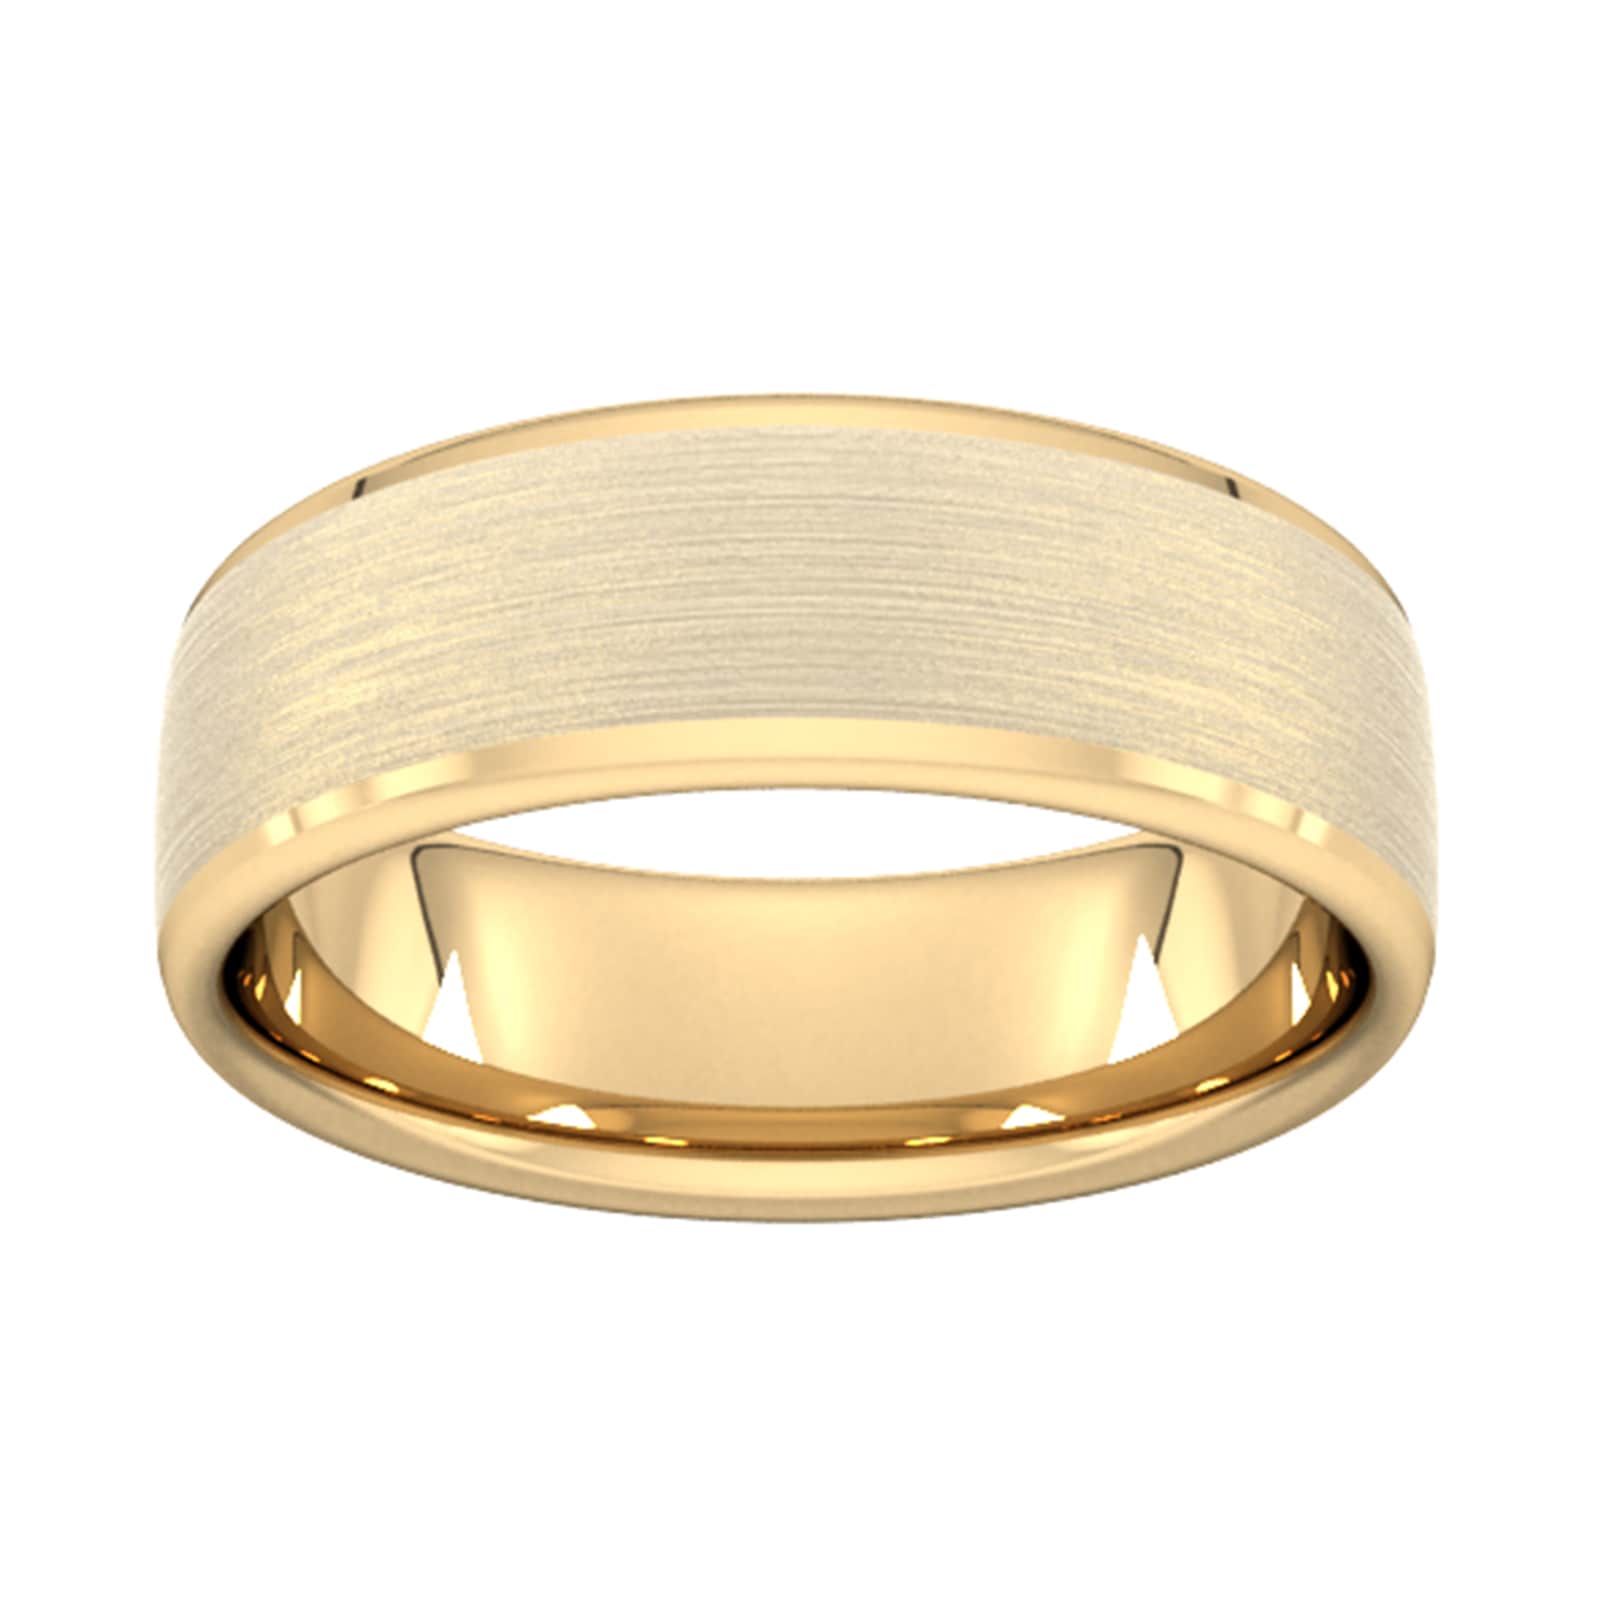 7mm D Shape Heavy Polished Chamfered Edges With Matt Centre Wedding Ring In 9 Carat Yellow Gold - Ring Size H